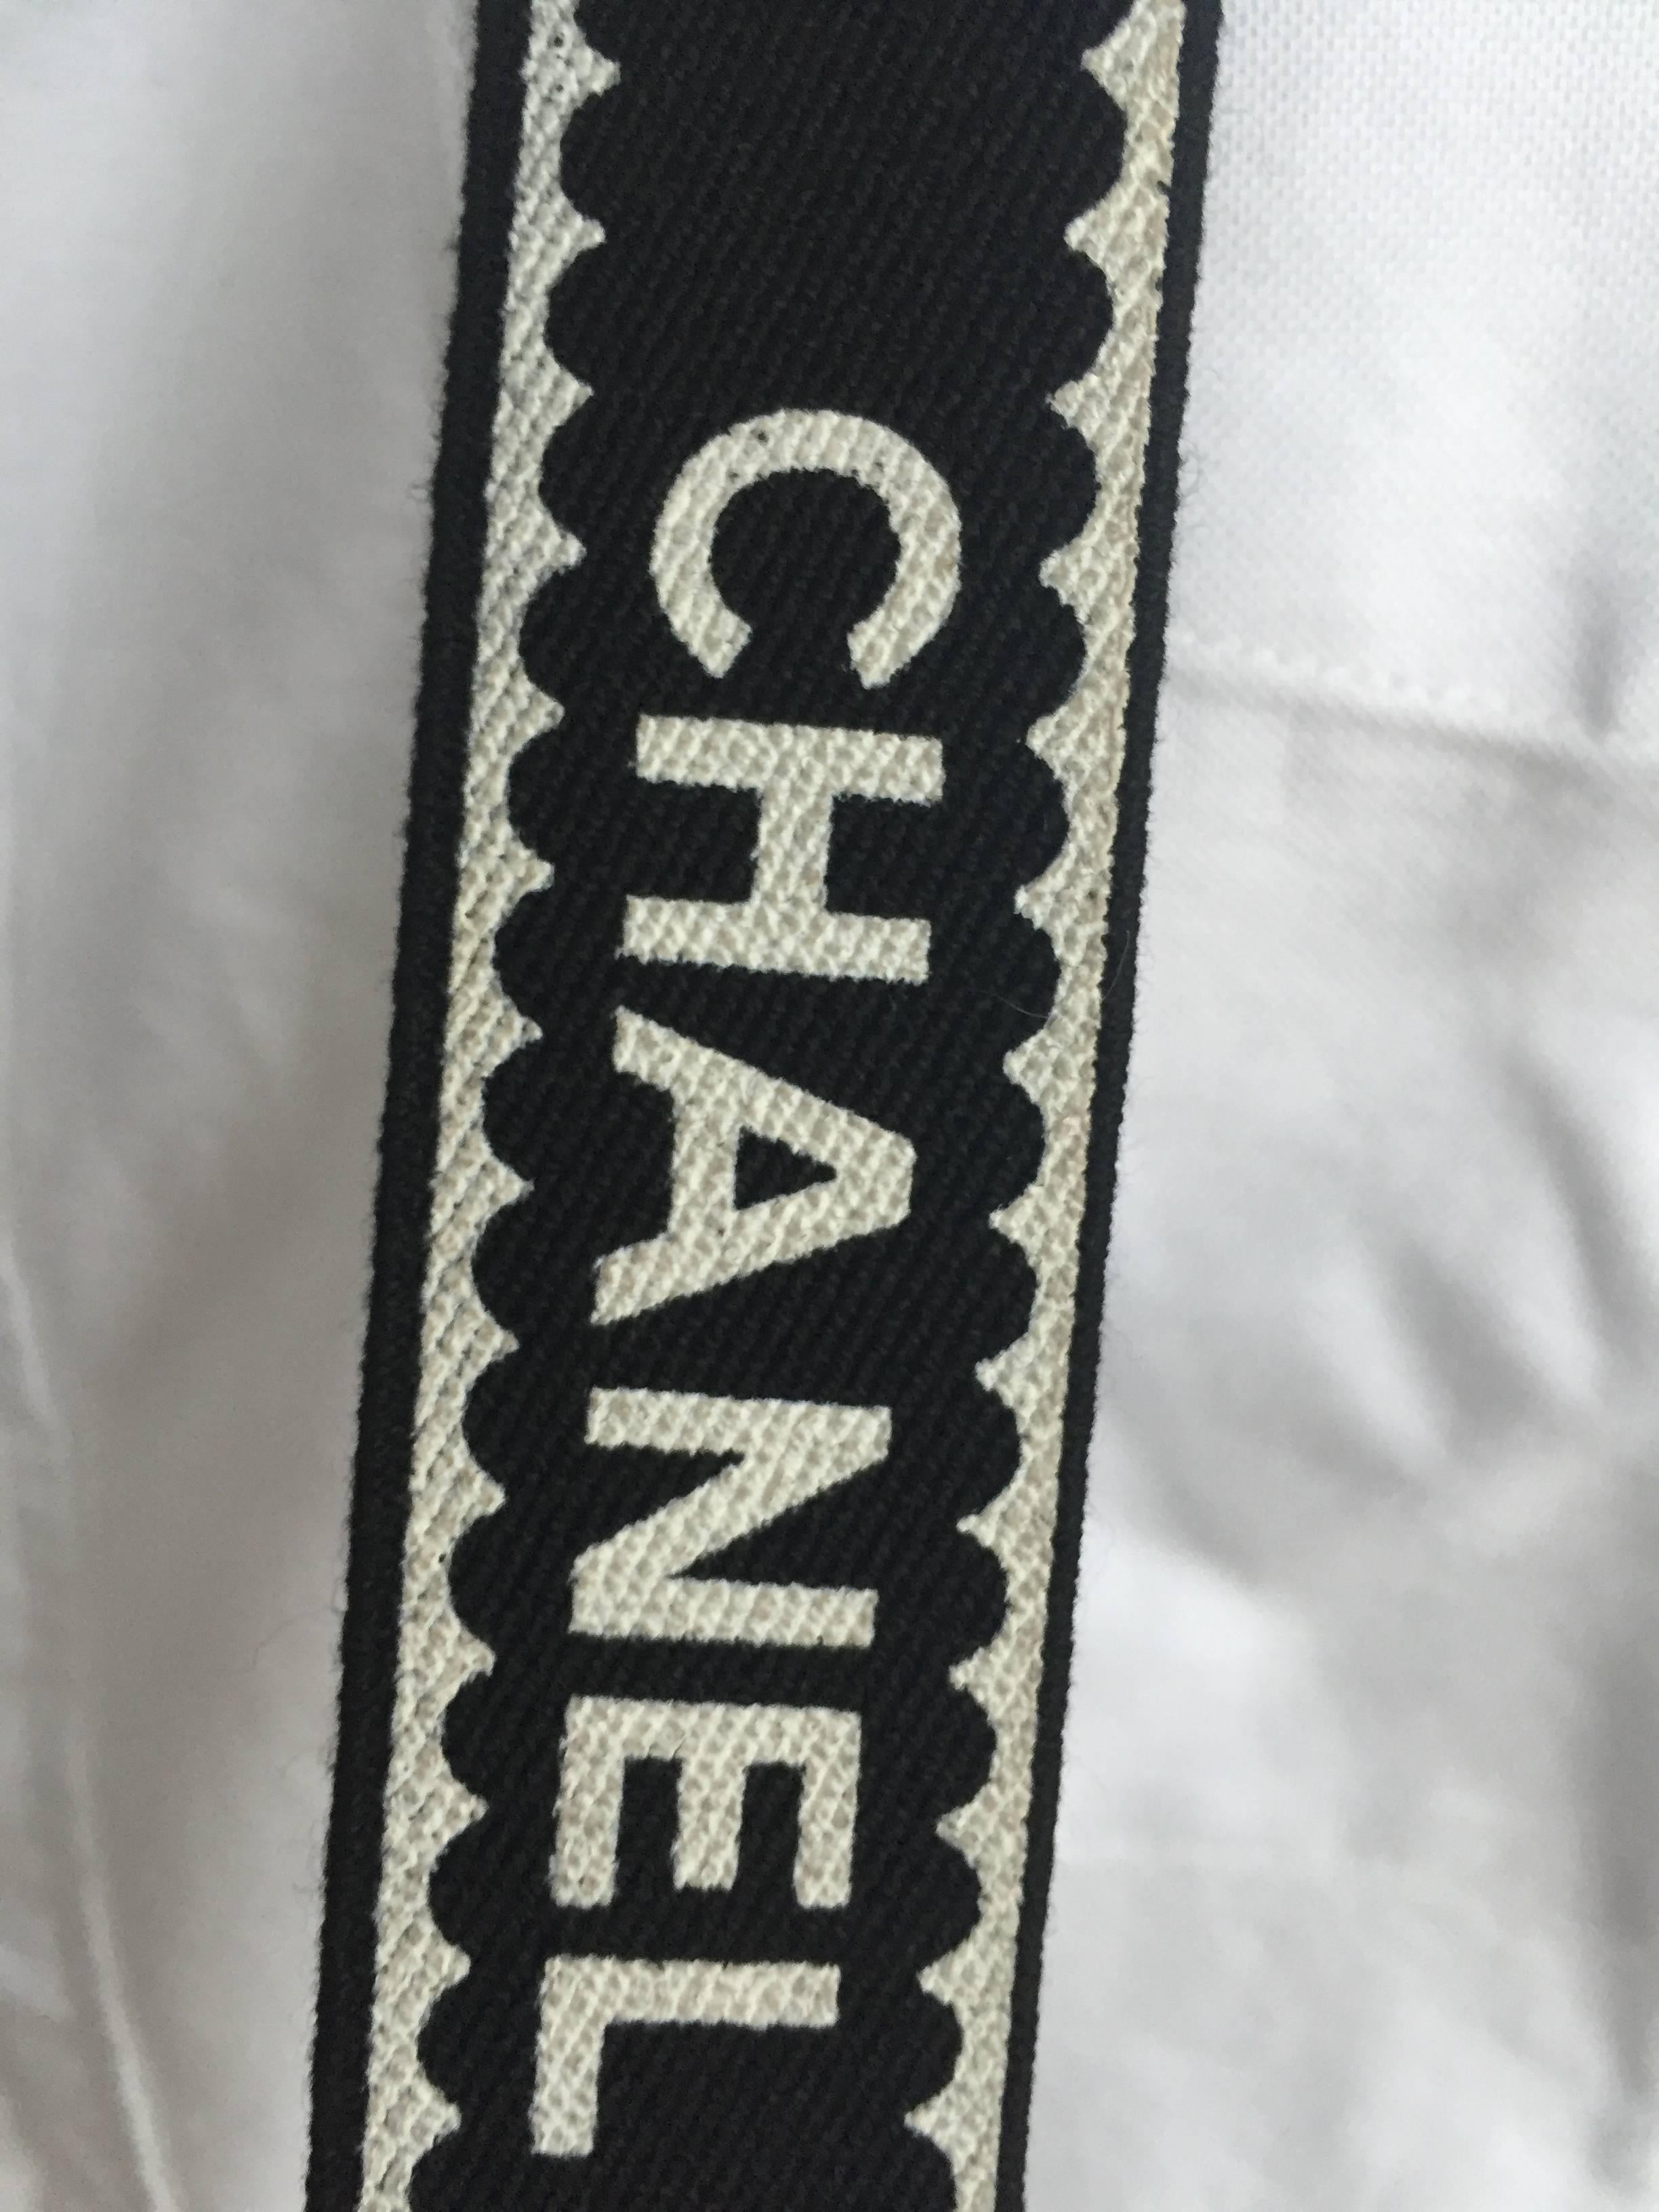 Chanel Suspenders in Pristine Condition.
These appear to have rarely if ever worn, the stretch elastic is pristine.